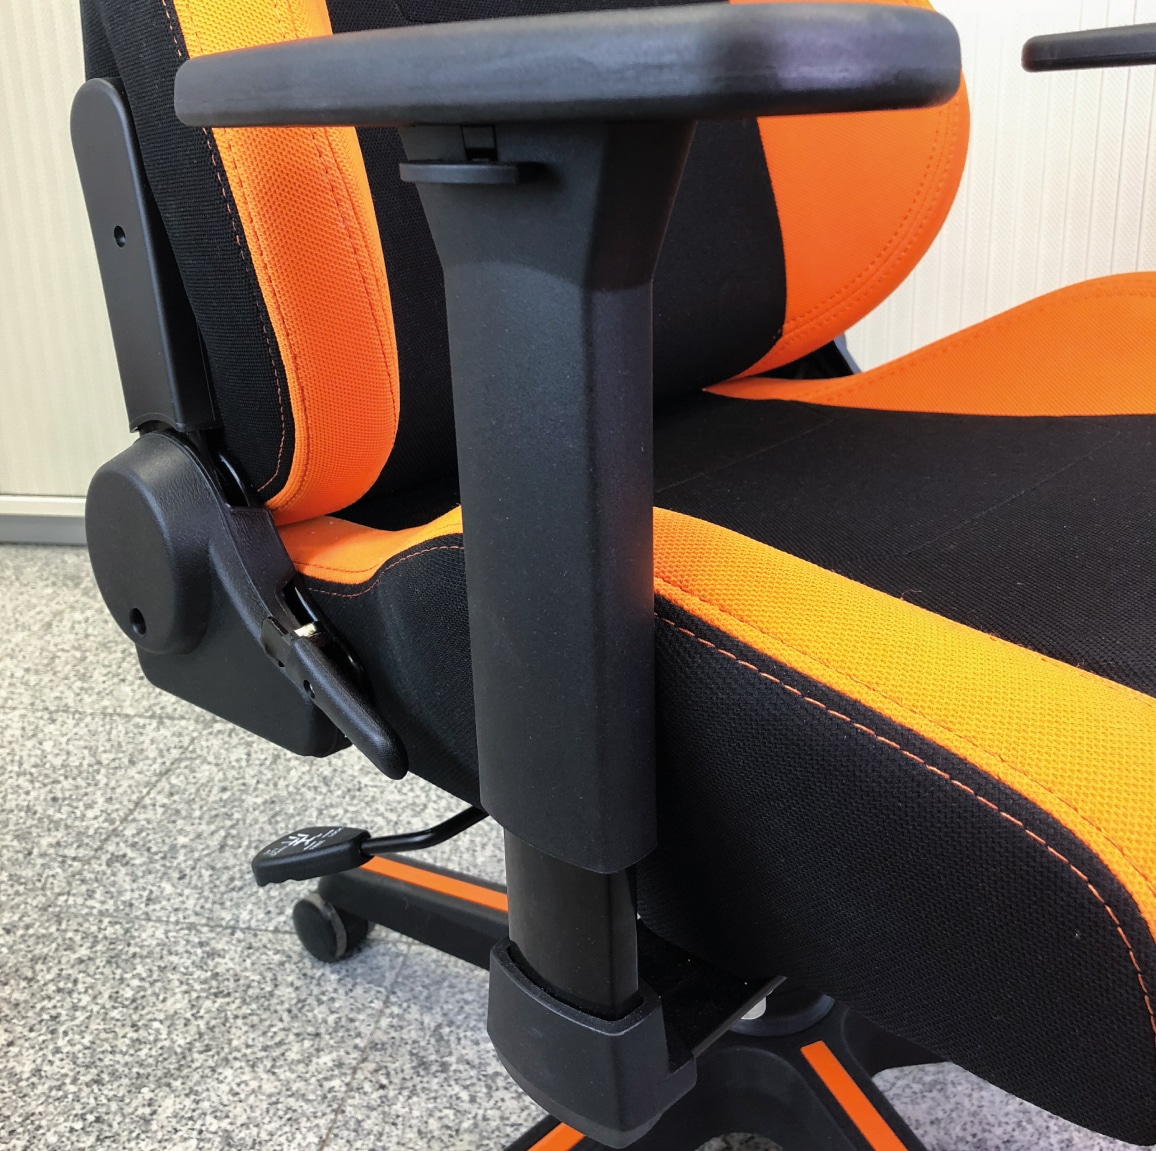 Armrests of the Nitro Concepts S300